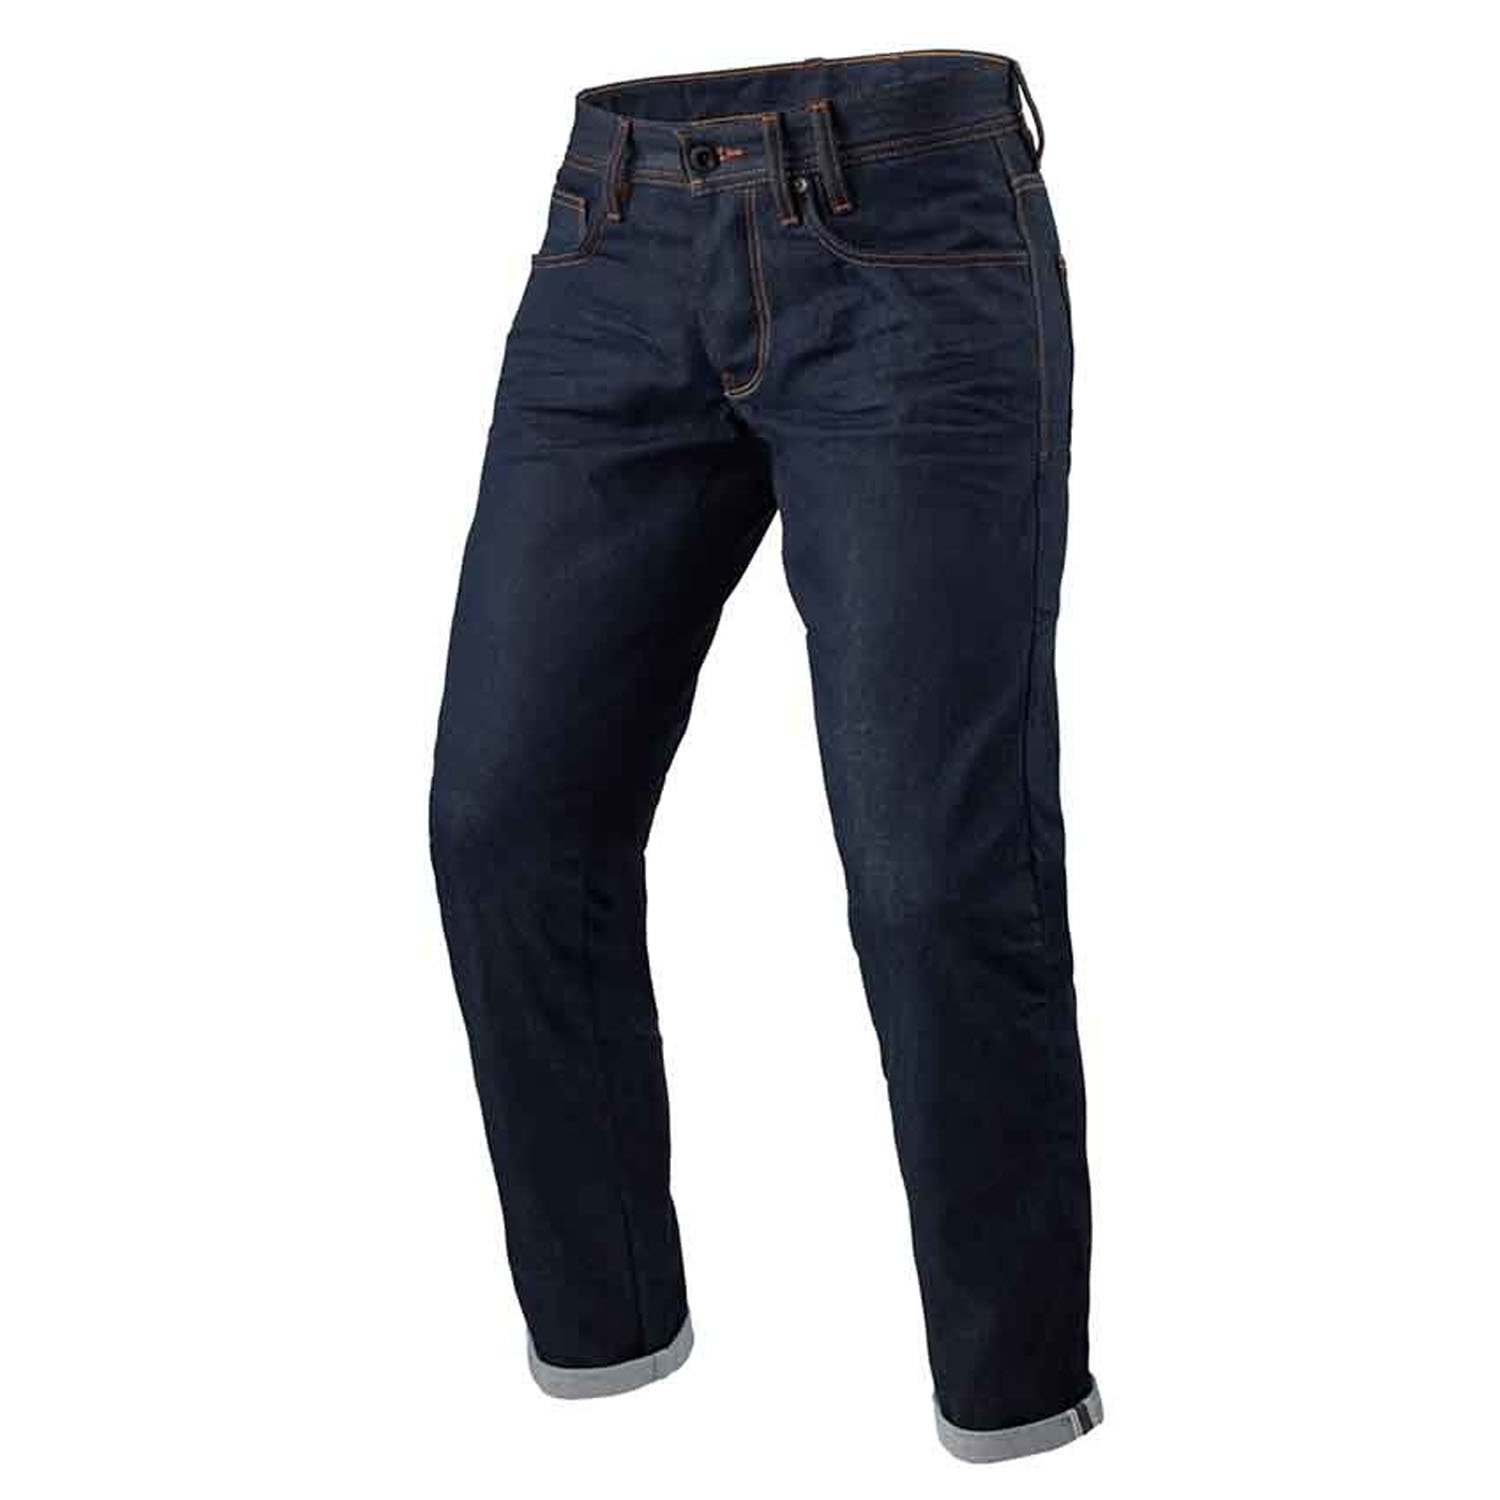 Image of REV'IT! Jeans Lewis Selvedge TF Dark Blue L36 Motorcycle Pants Size L36/W31 ID 8700001358101